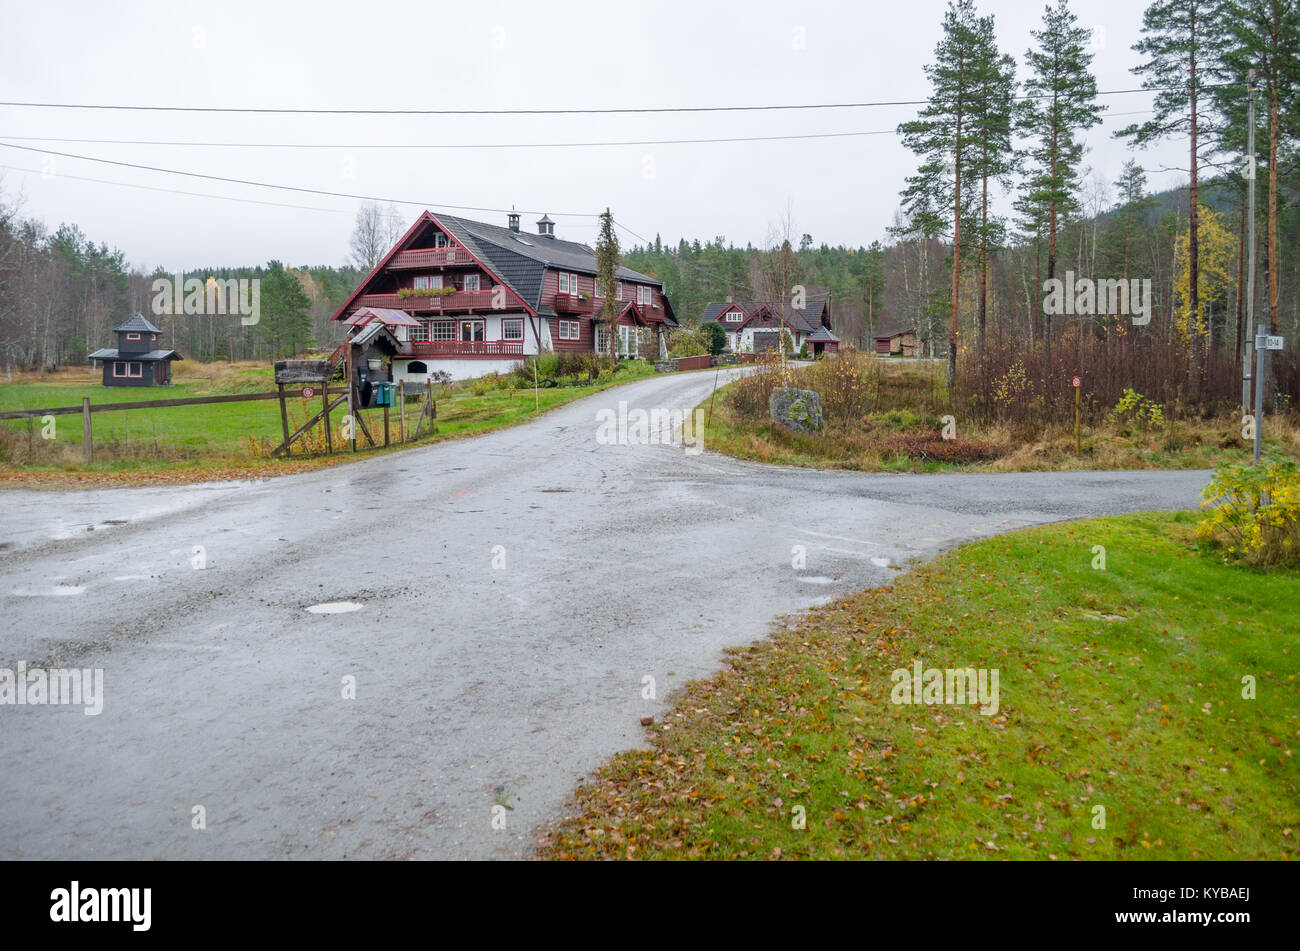 Evje Mineralsti- retired gemstone mine and local tourist attraction. Traditional Norwegian buildings on the road to this place. Stock Photo